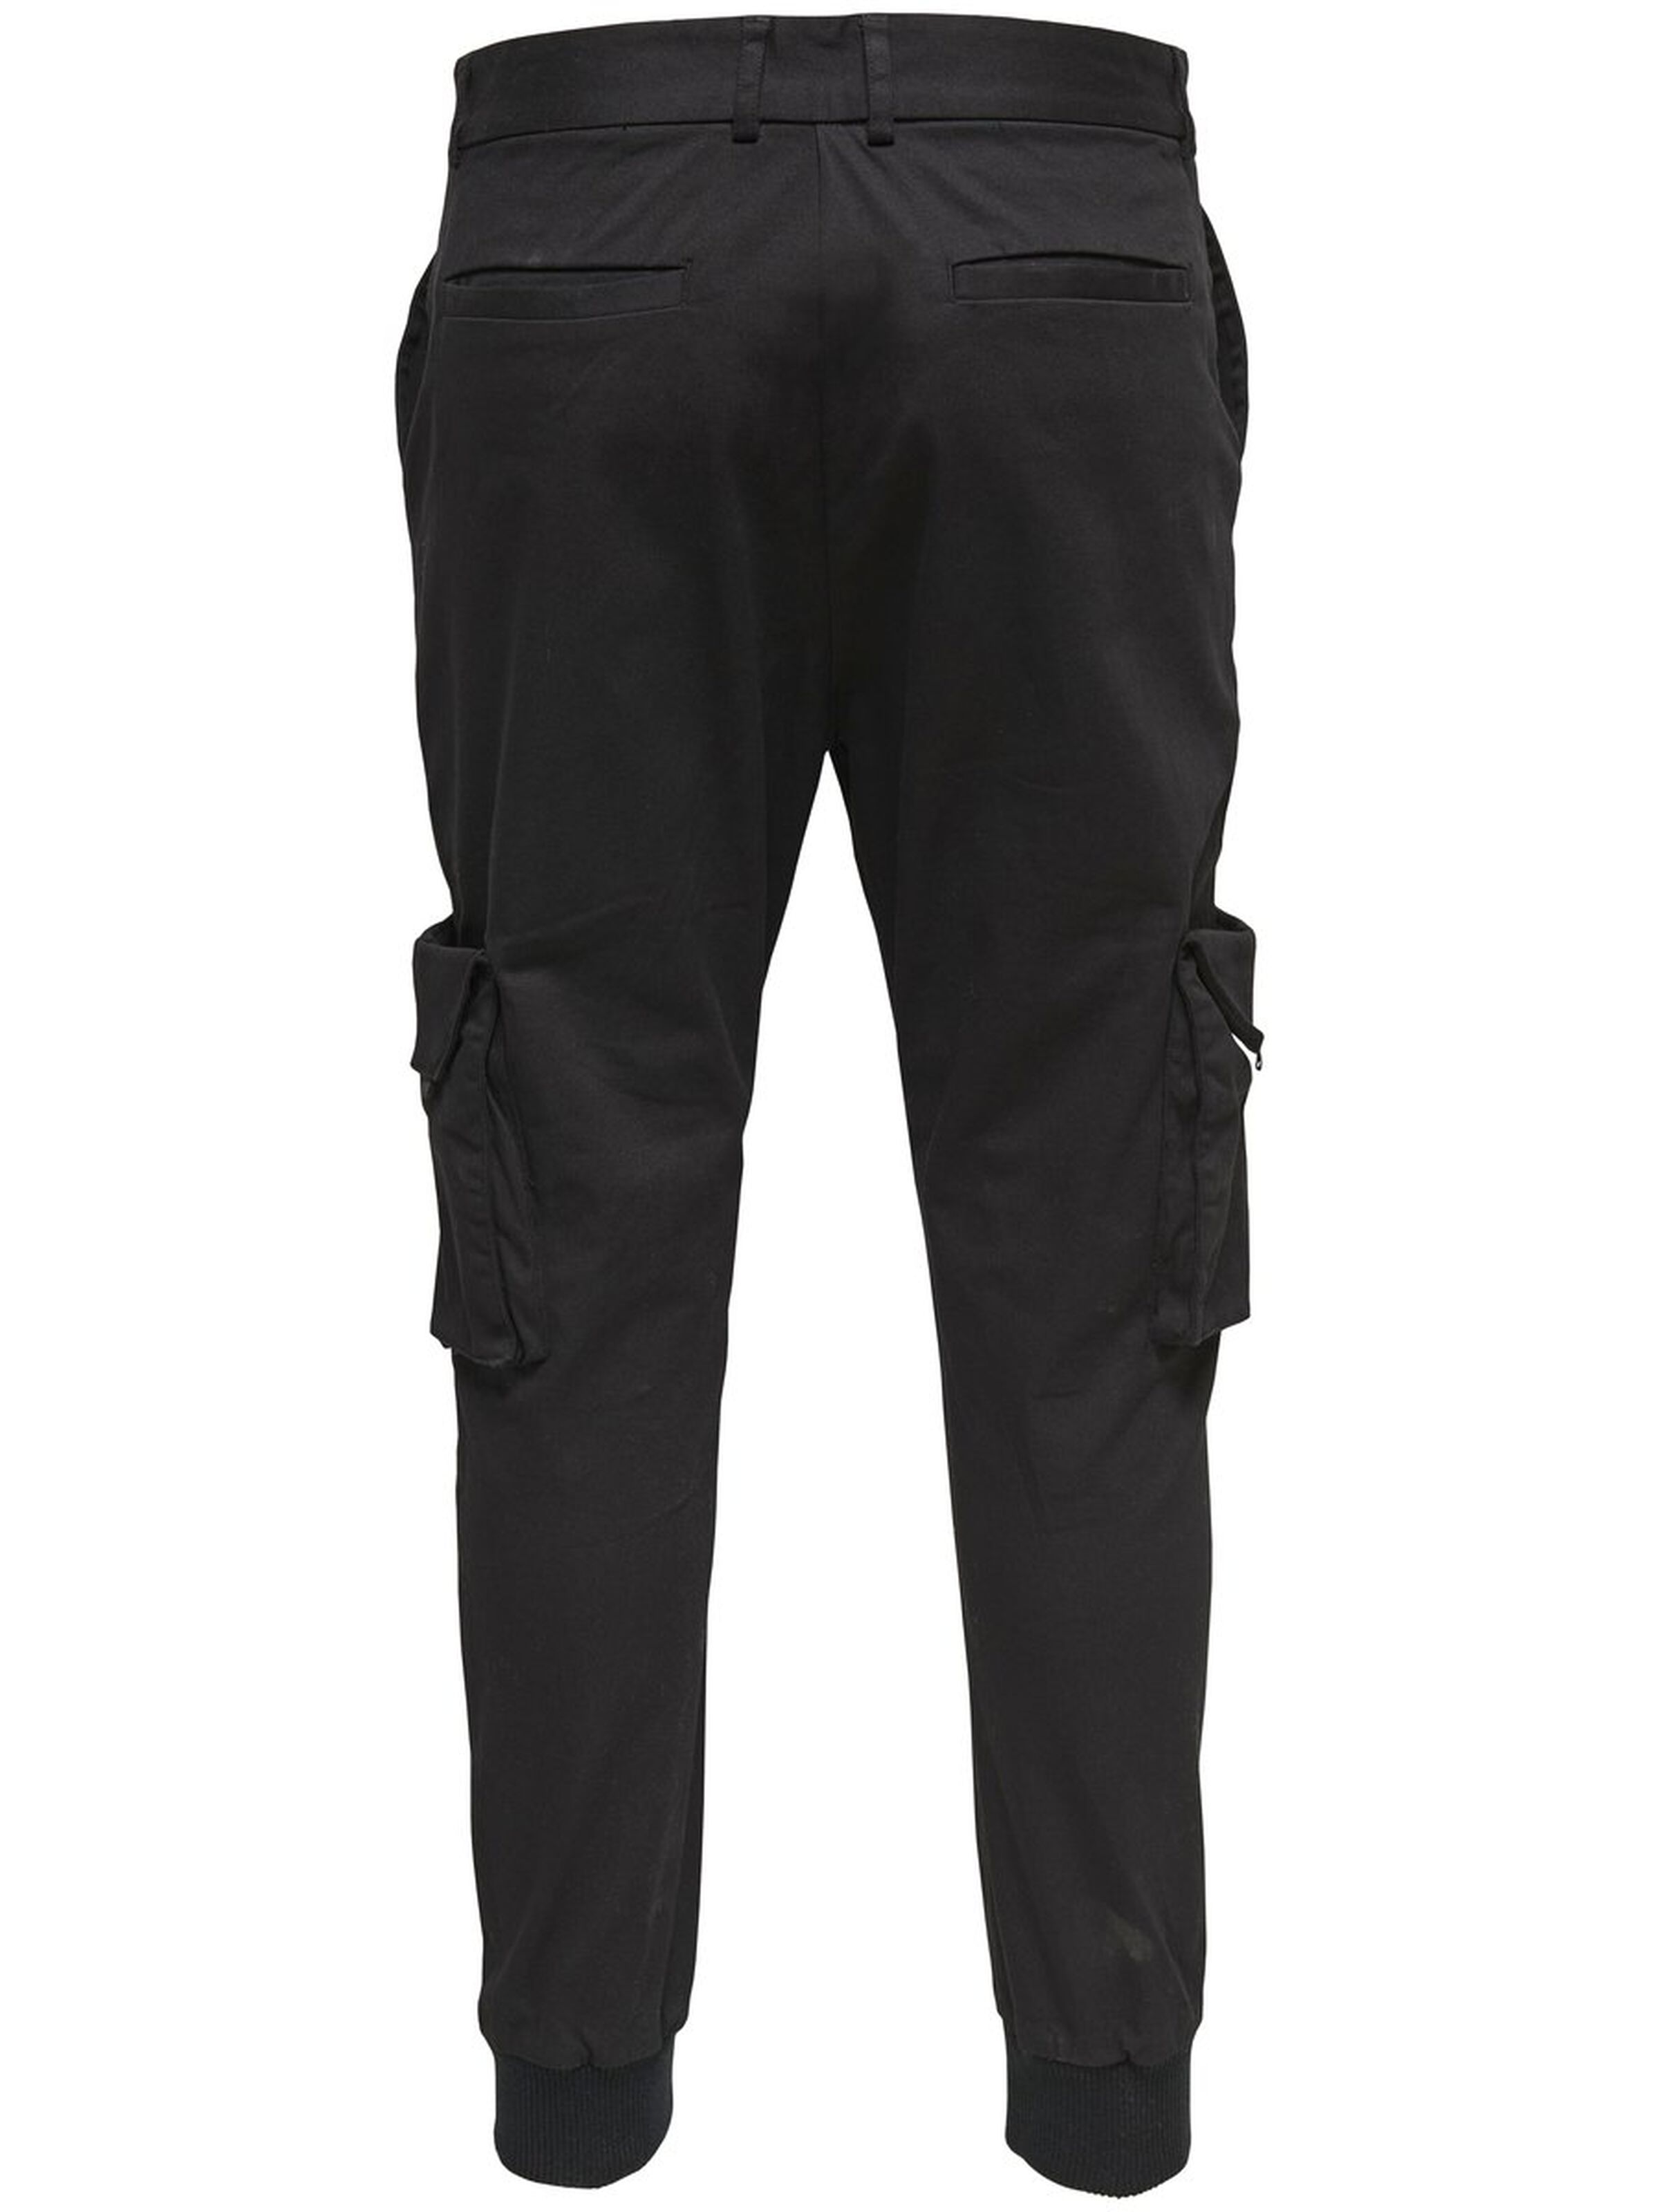 Only /& Sons Men/'s Cargo Combat Pants Cuffed Trouser Black  All Waist Size